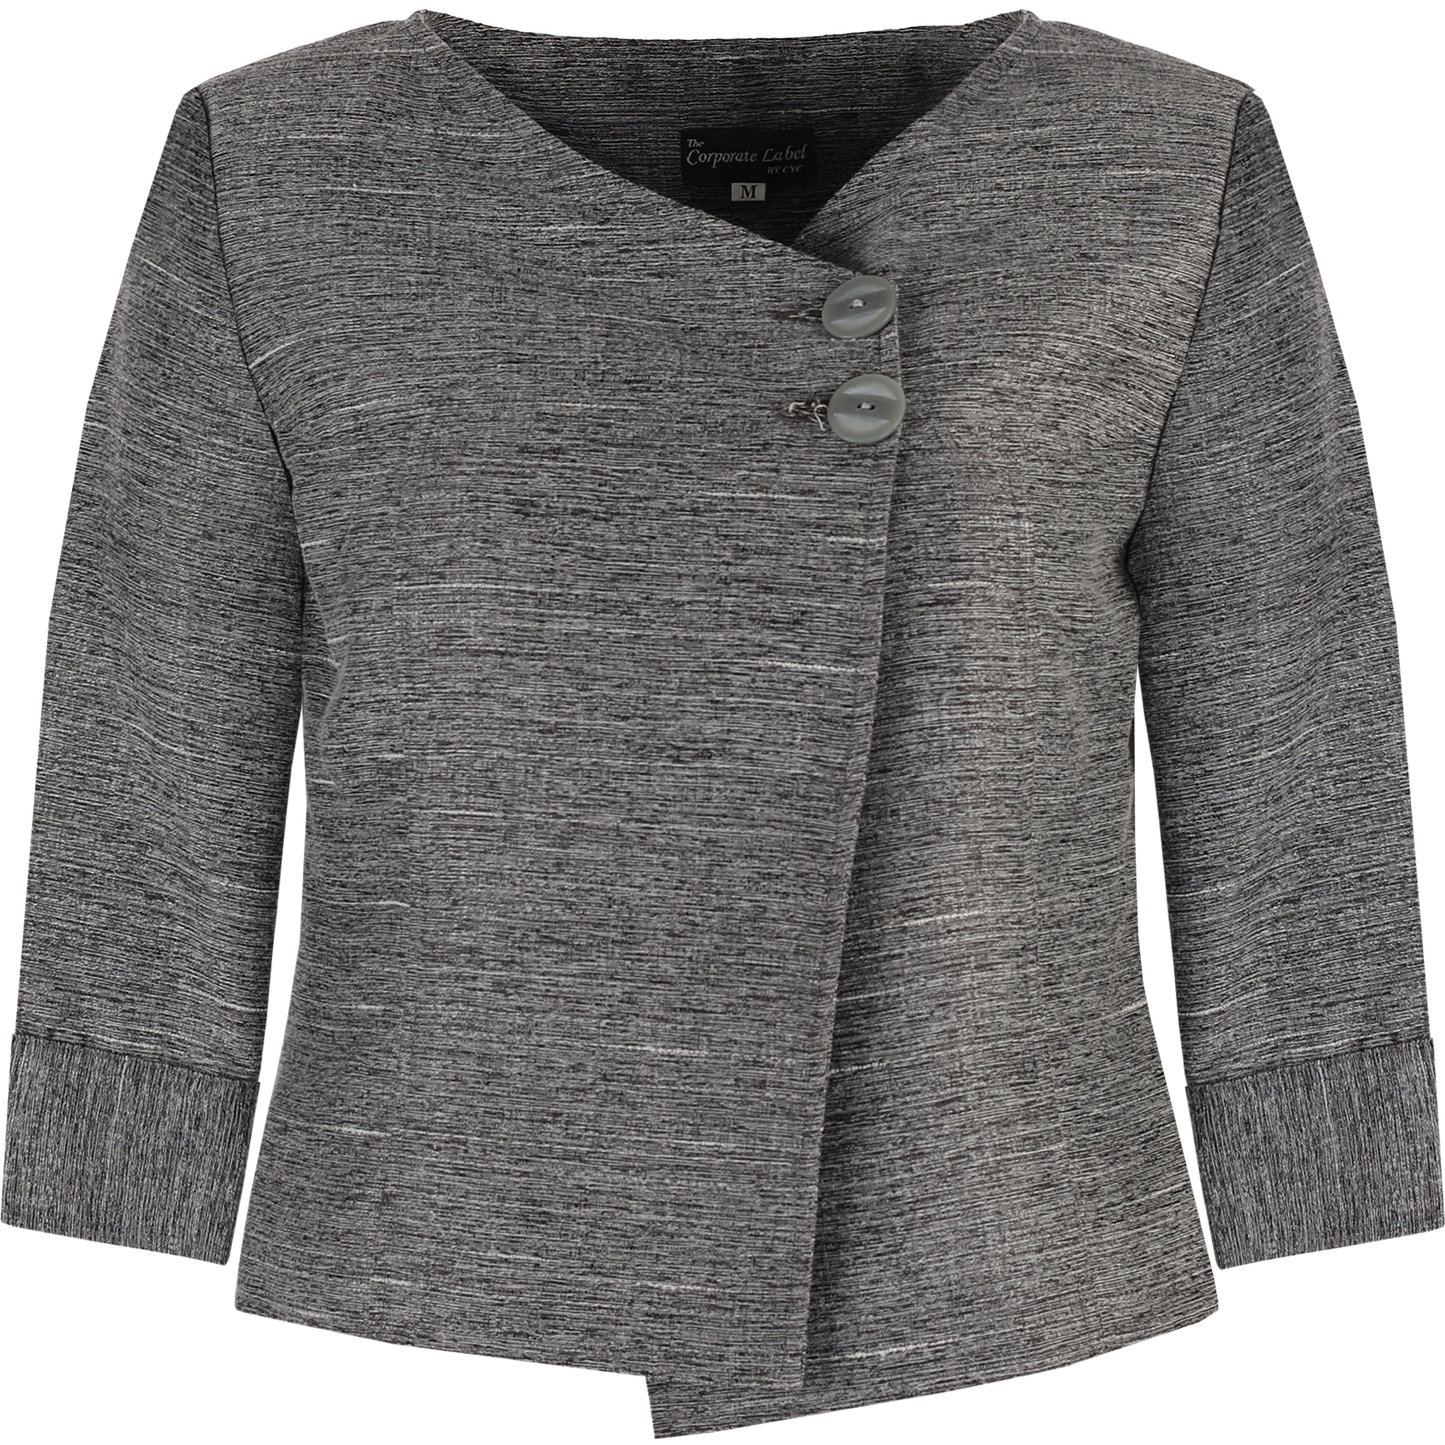 Cropped Ladies Jacket for Female Frontline Associate — Uniforms by CYC Corporate Label